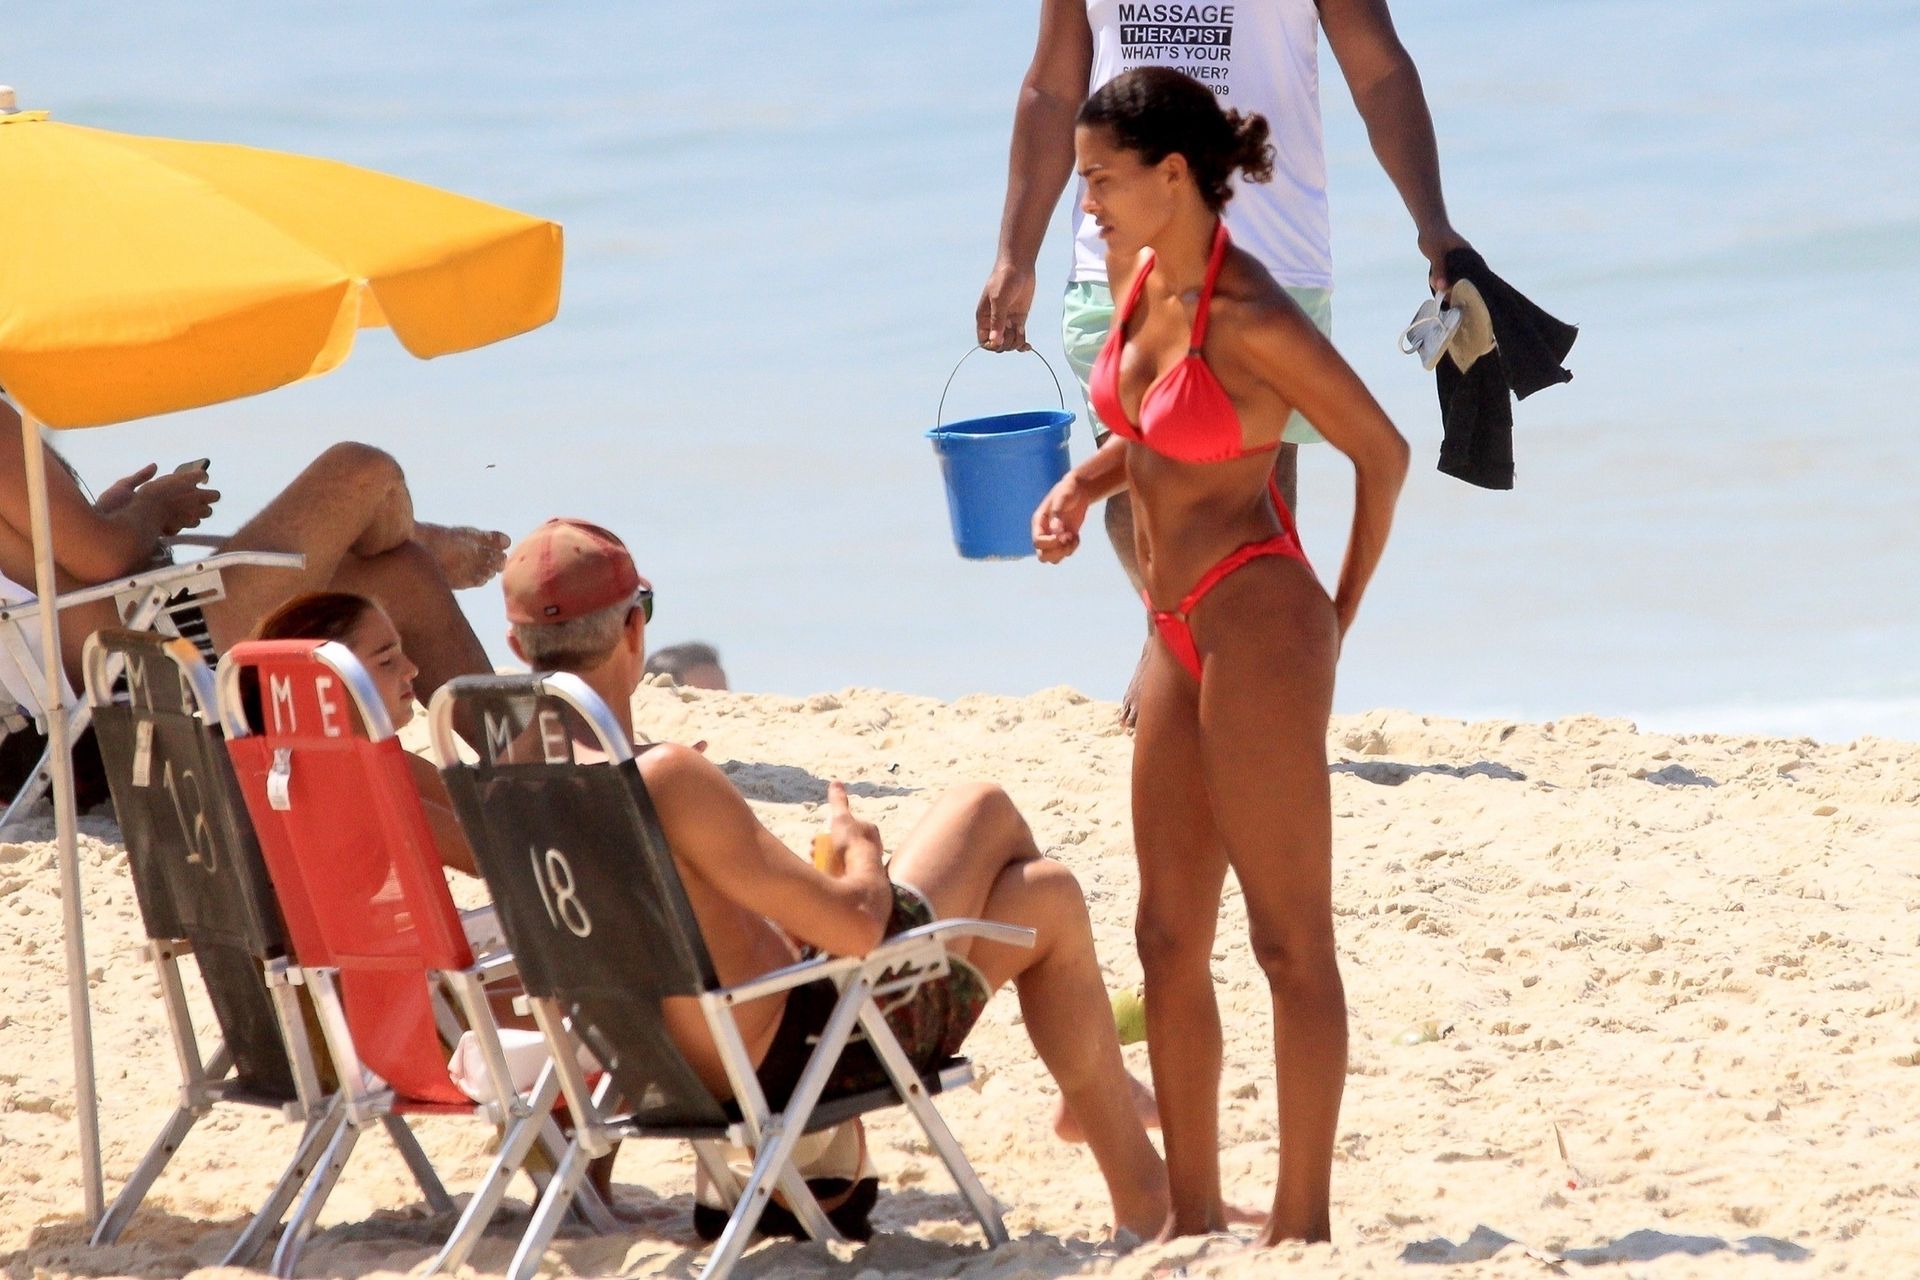 Vincent Cassel & Tina Kunakey Bare Their Hot Bodies at the Beach in Brazil (40 Photos)